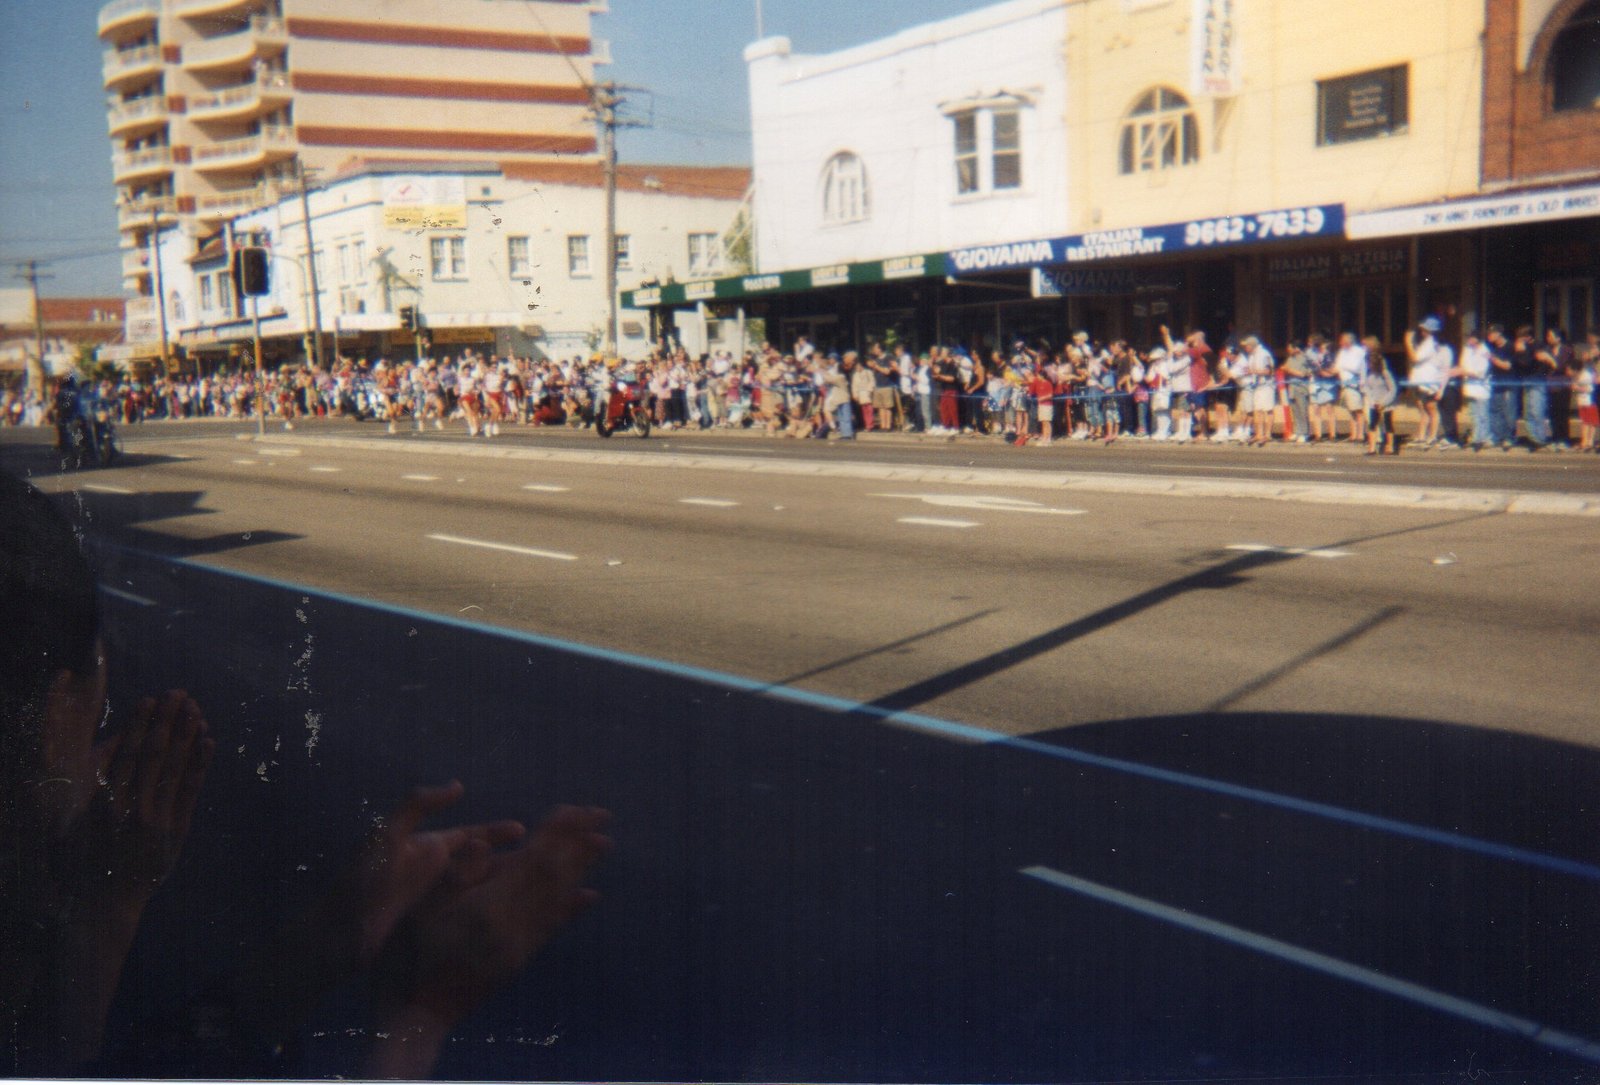 069 Driving buses in Sydney for the olympics 2000.jpg